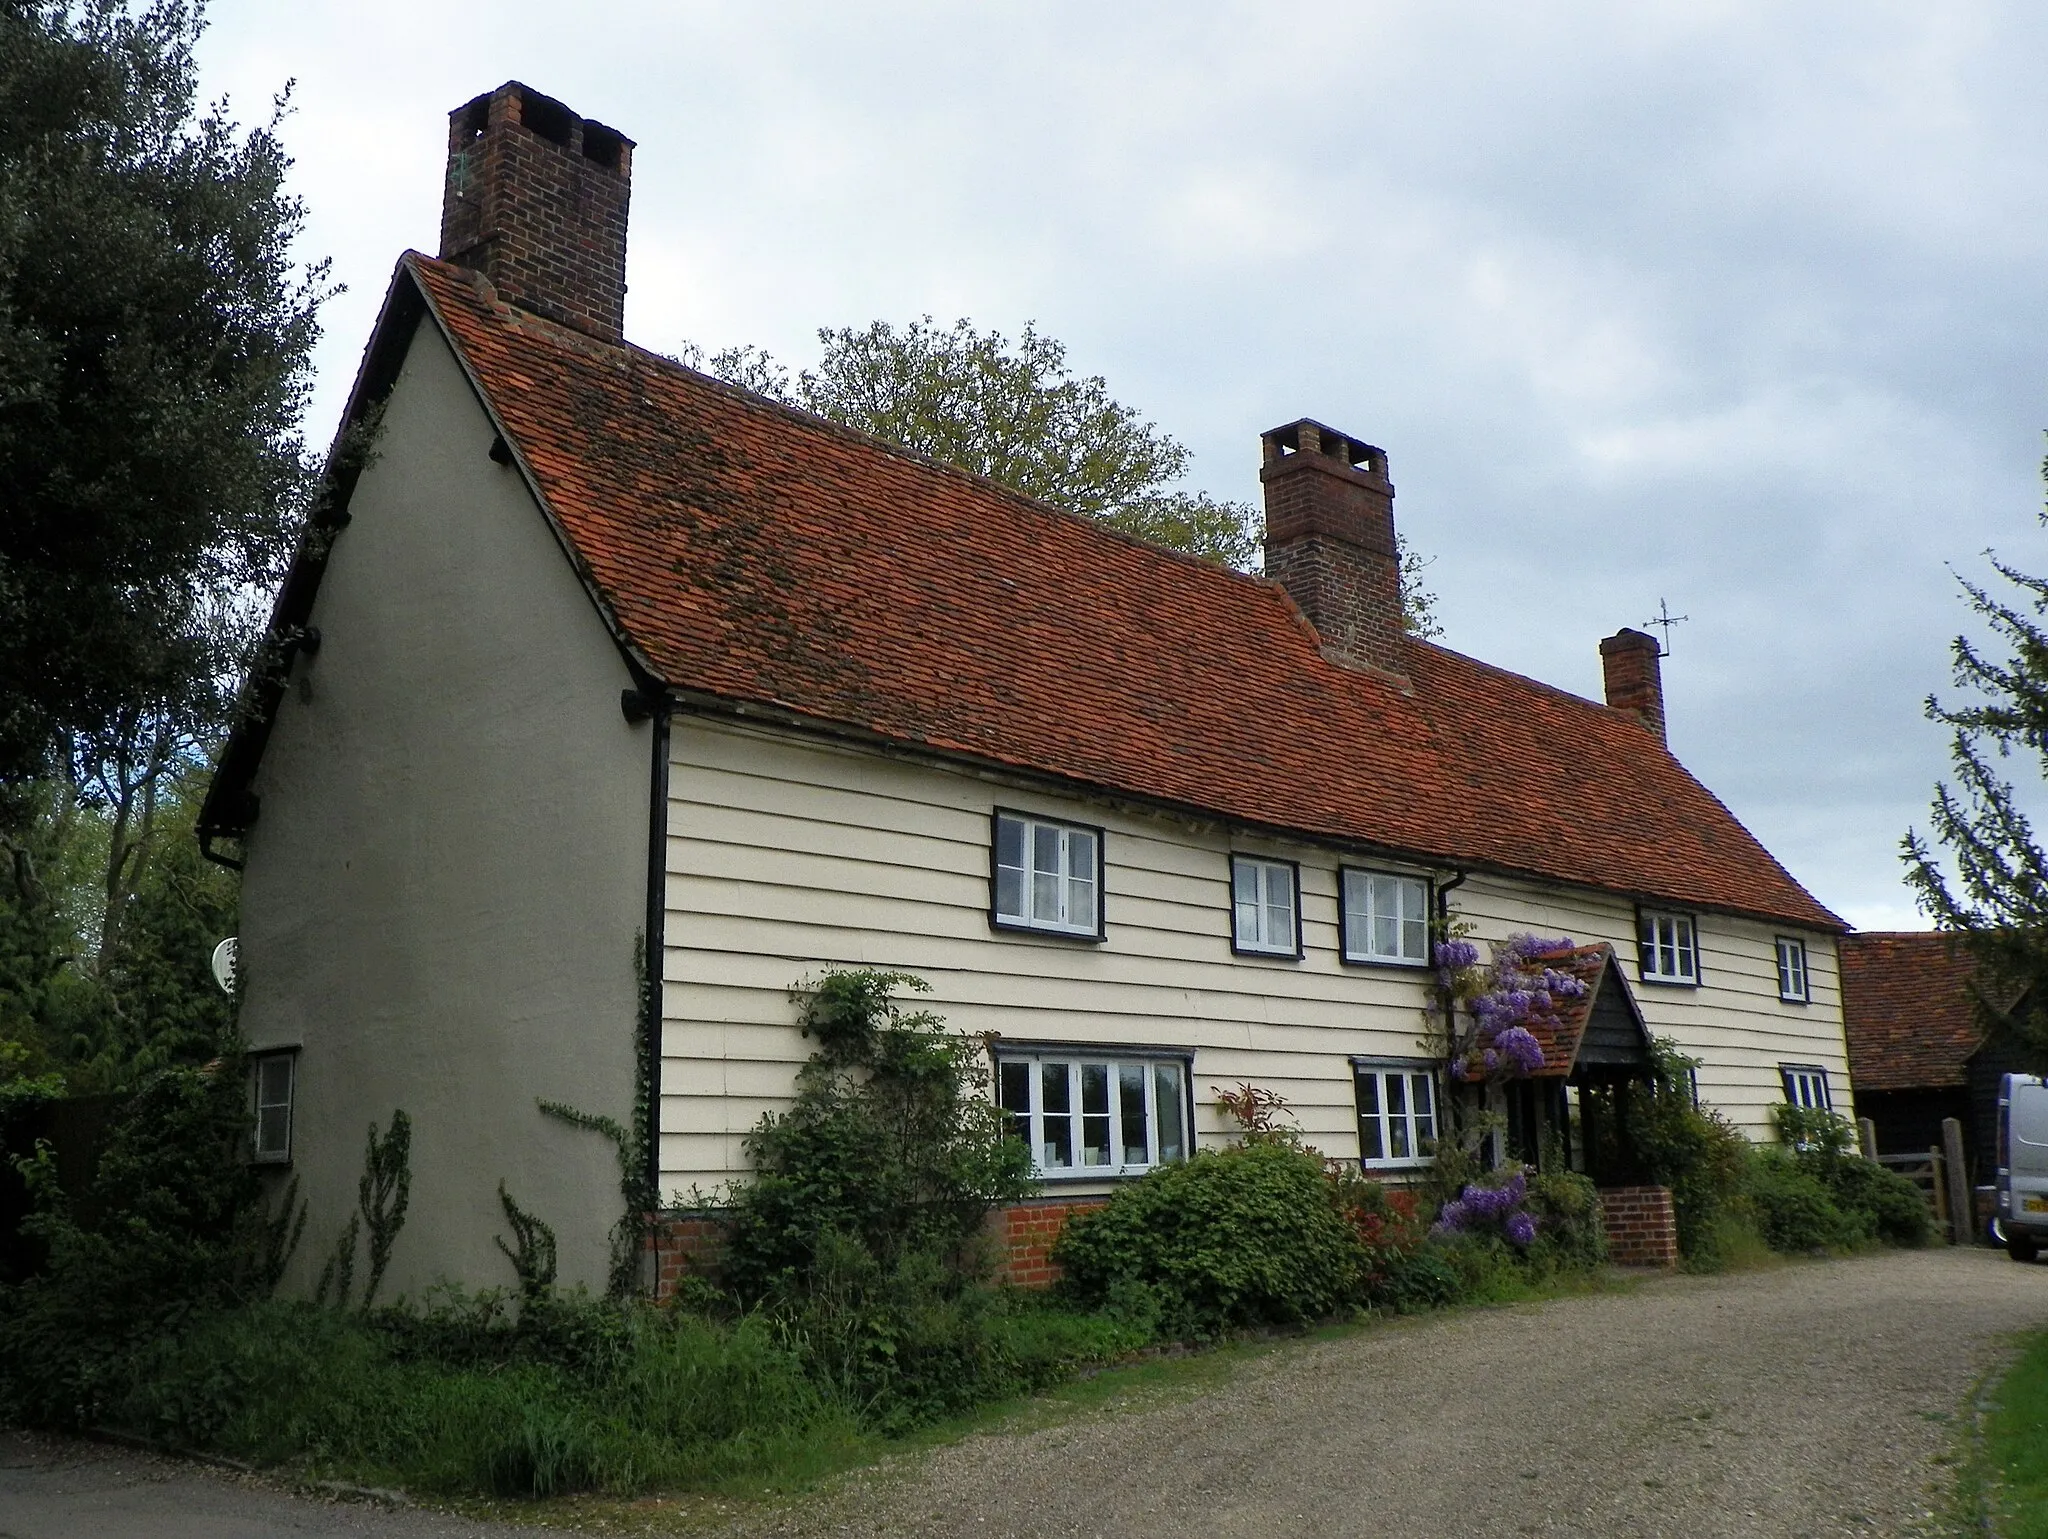 Photo showing: The Chantry House, Furneux Pelham, Hertfordshire (Grade II).

GOC Hertfordshire's walk on 14 May 2016, in and around Furneux Pelham, Brent Pelham and Stocking Pelham, Hertfordshire. David W led this 10.2-mile walk, attended by 16 people. You can view my other photos of this event, read the original event report, find out more about the Gay Outdoor Club or see my collections.